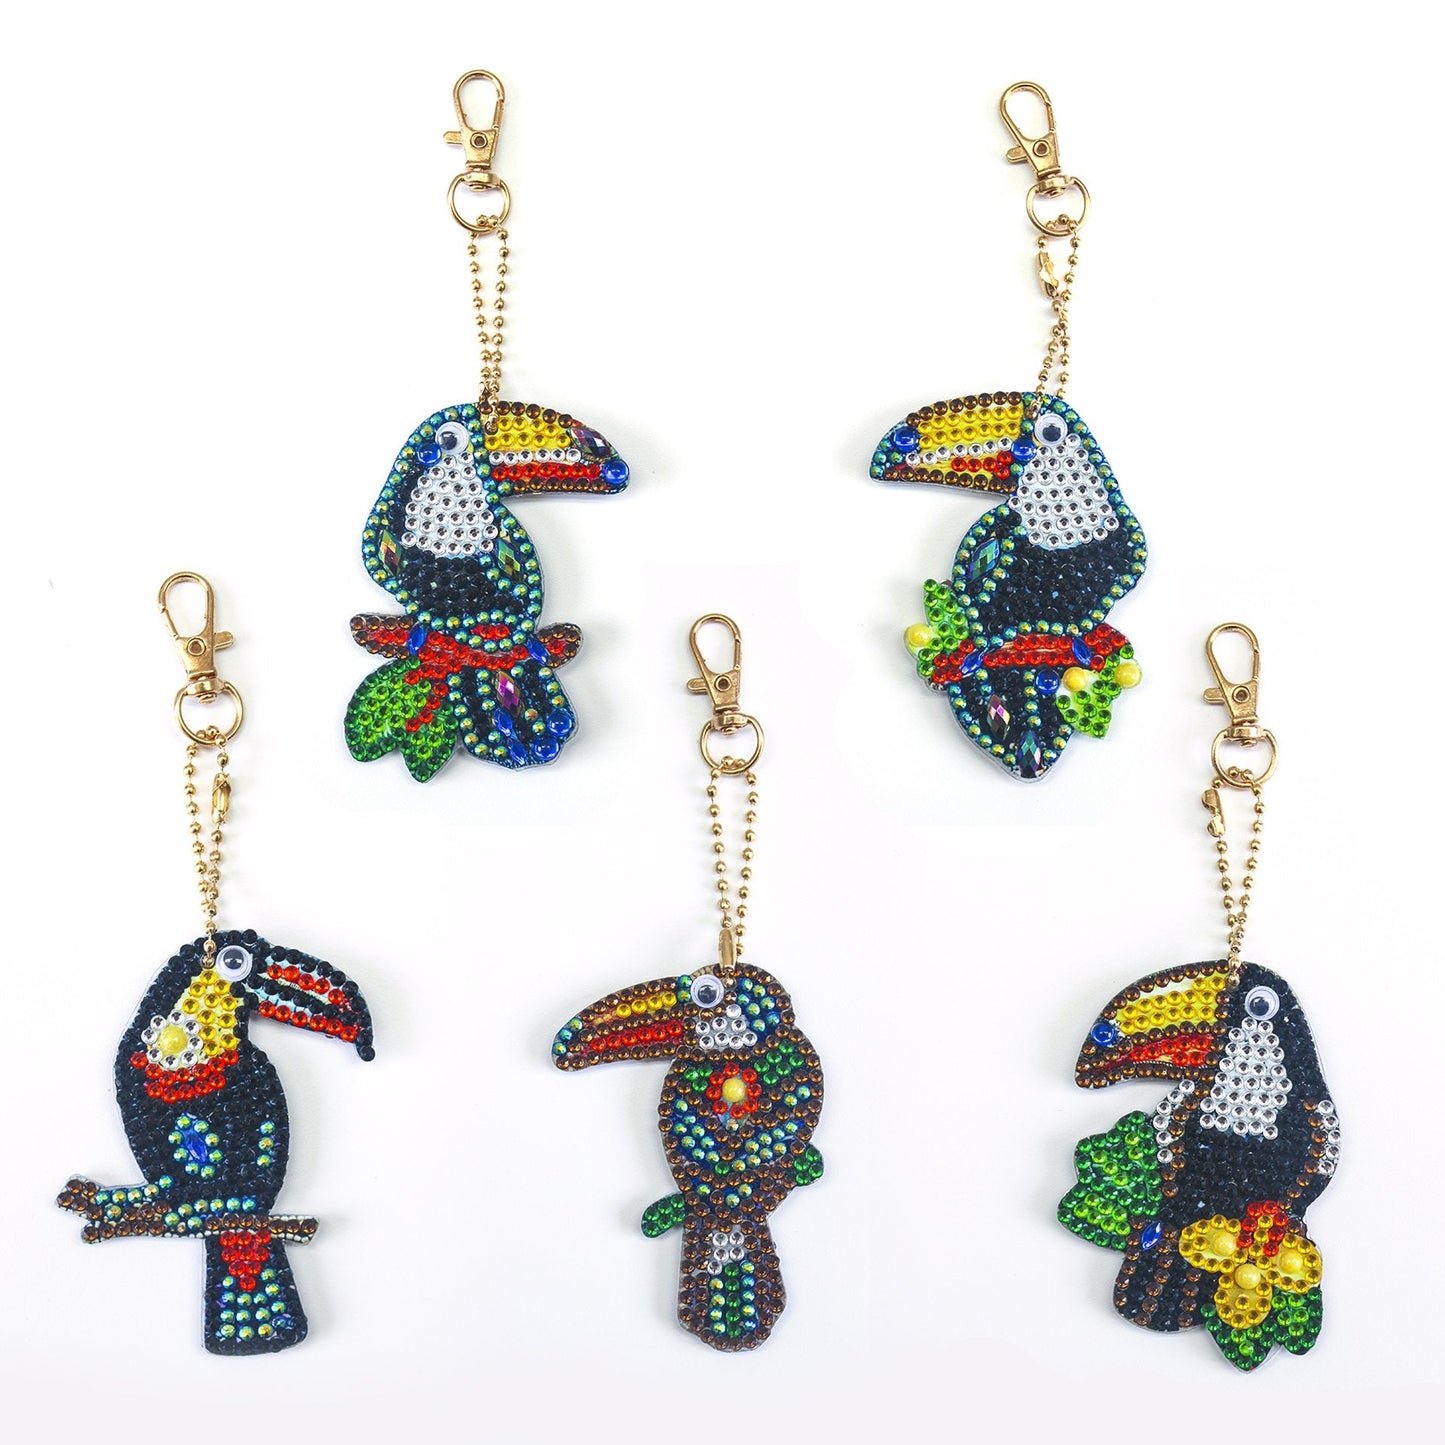 Double-sided stickers special diamond painted keychain key ring-Parrot